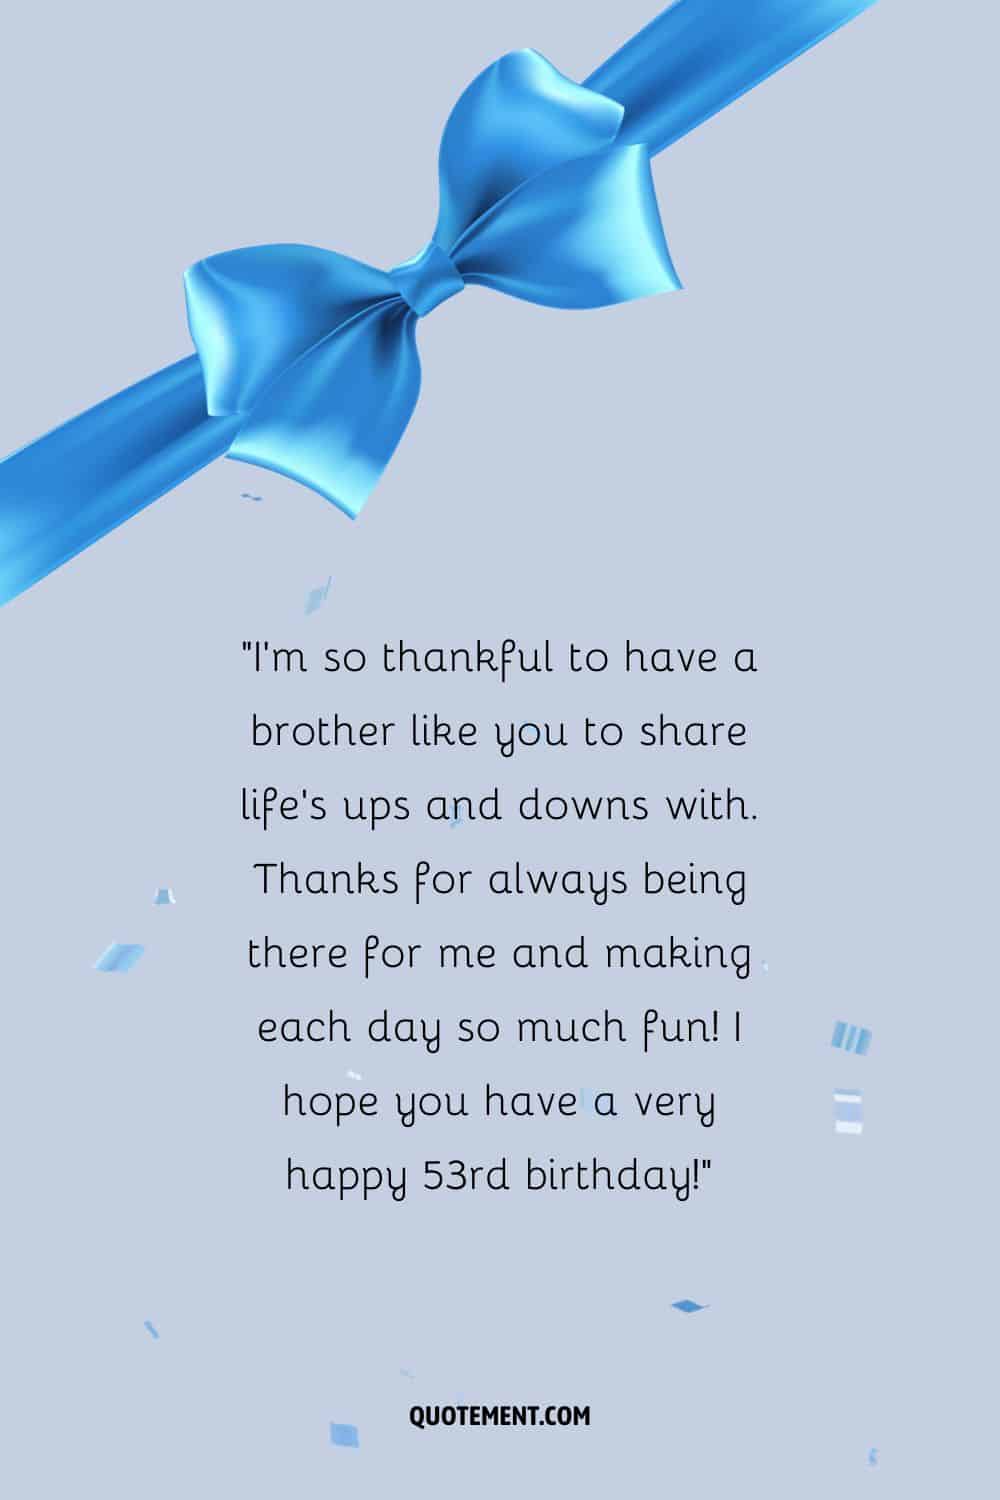 Lovely message for a brother who turns 53, a blue ribbon and confetti